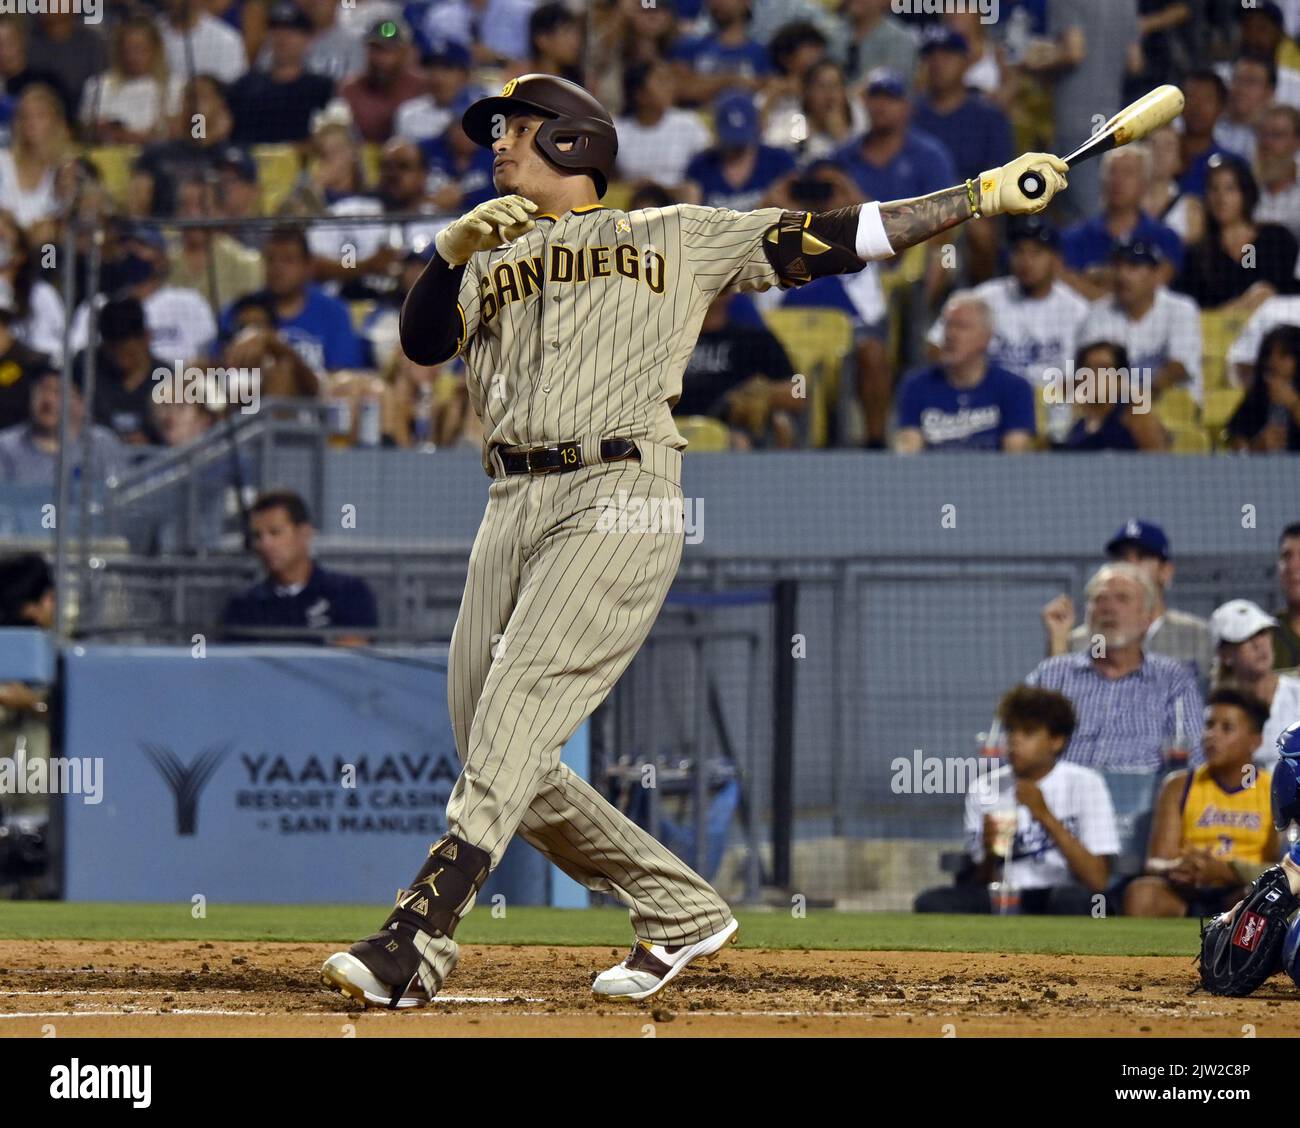 https://c8.alamy.com/comp/2JW2C8P/los-angeles-usa-02nd-sep-2022-san-diego-padres-manny-machado-hits-a-two-run-home-run-off-los-angeles-dodgers-starting-pitcher-dustin-may-during-the-third-inning-at-dodger-stadium-in-los-angeles-on-friday-september-2-2022-photo-by-jim-ruymenupi-credit-upialamy-live-news-2JW2C8P.jpg